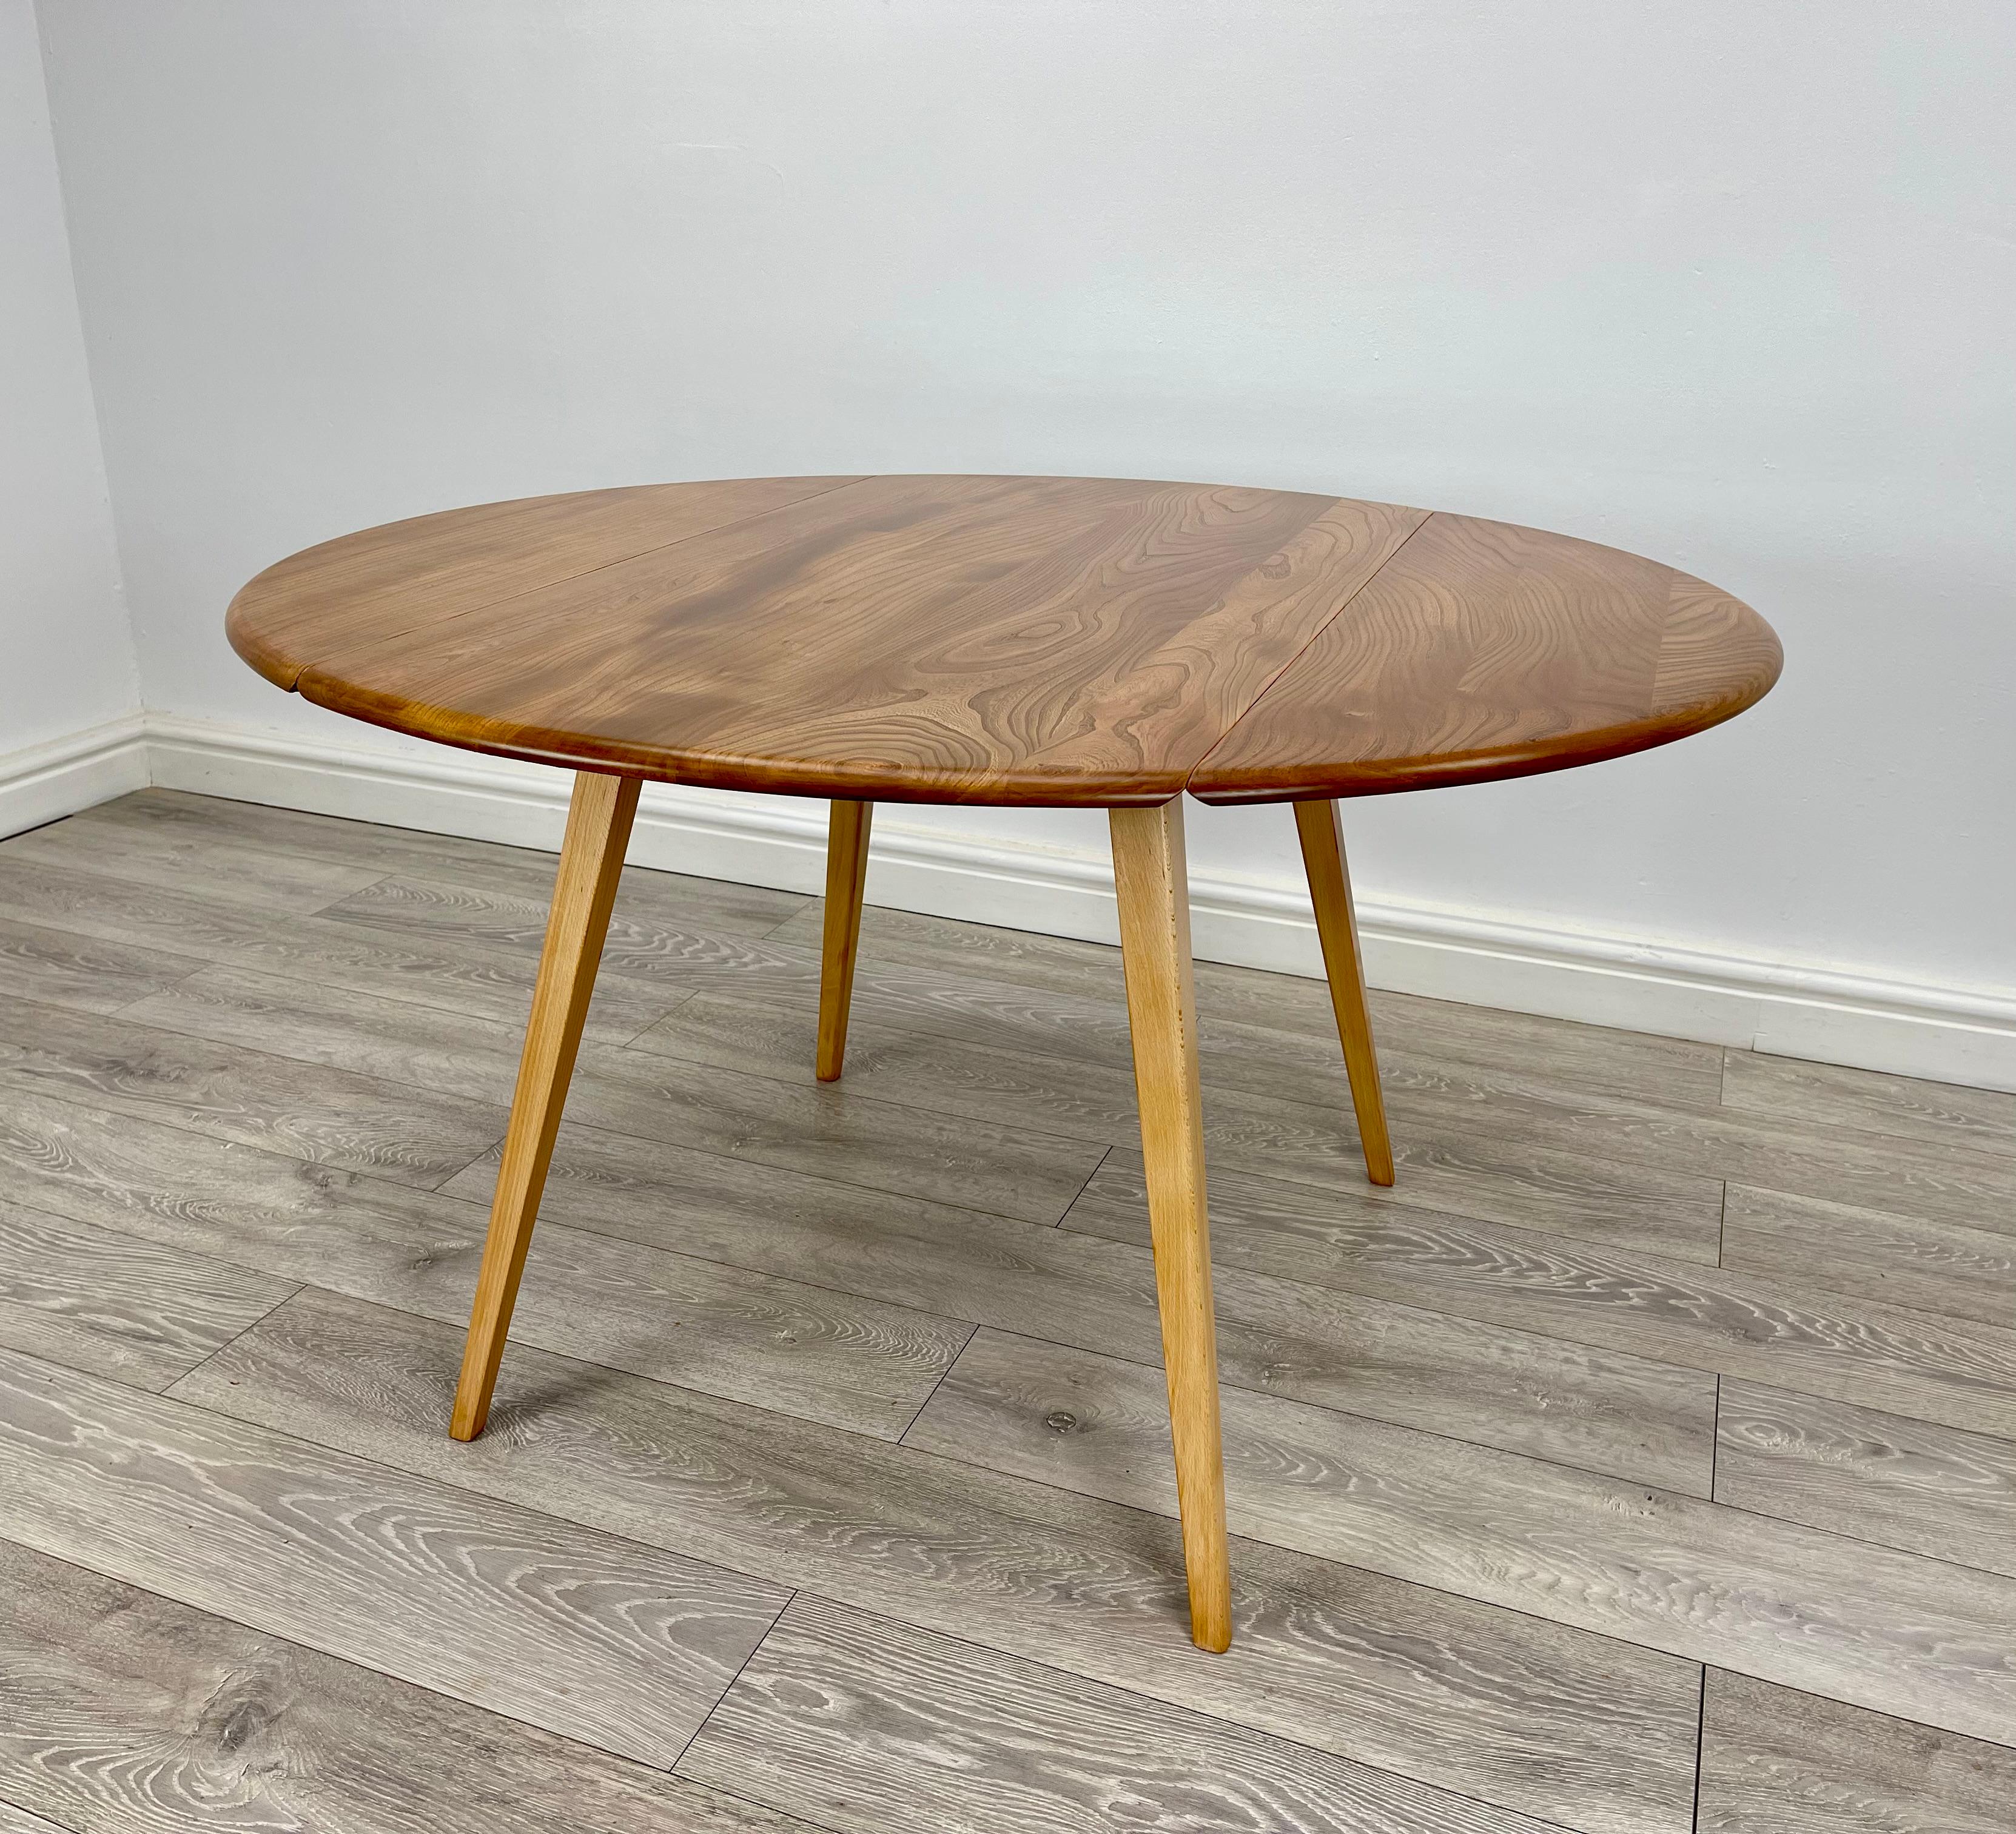 DINING TABLE 
Mid-century elm and beech drop leaf dining table made by ercol circa 1960 . 
The table has solid elm top with stunning grain Grain throughout , the legs are made from solid beech . 
The table can be easily stored away once the leafs